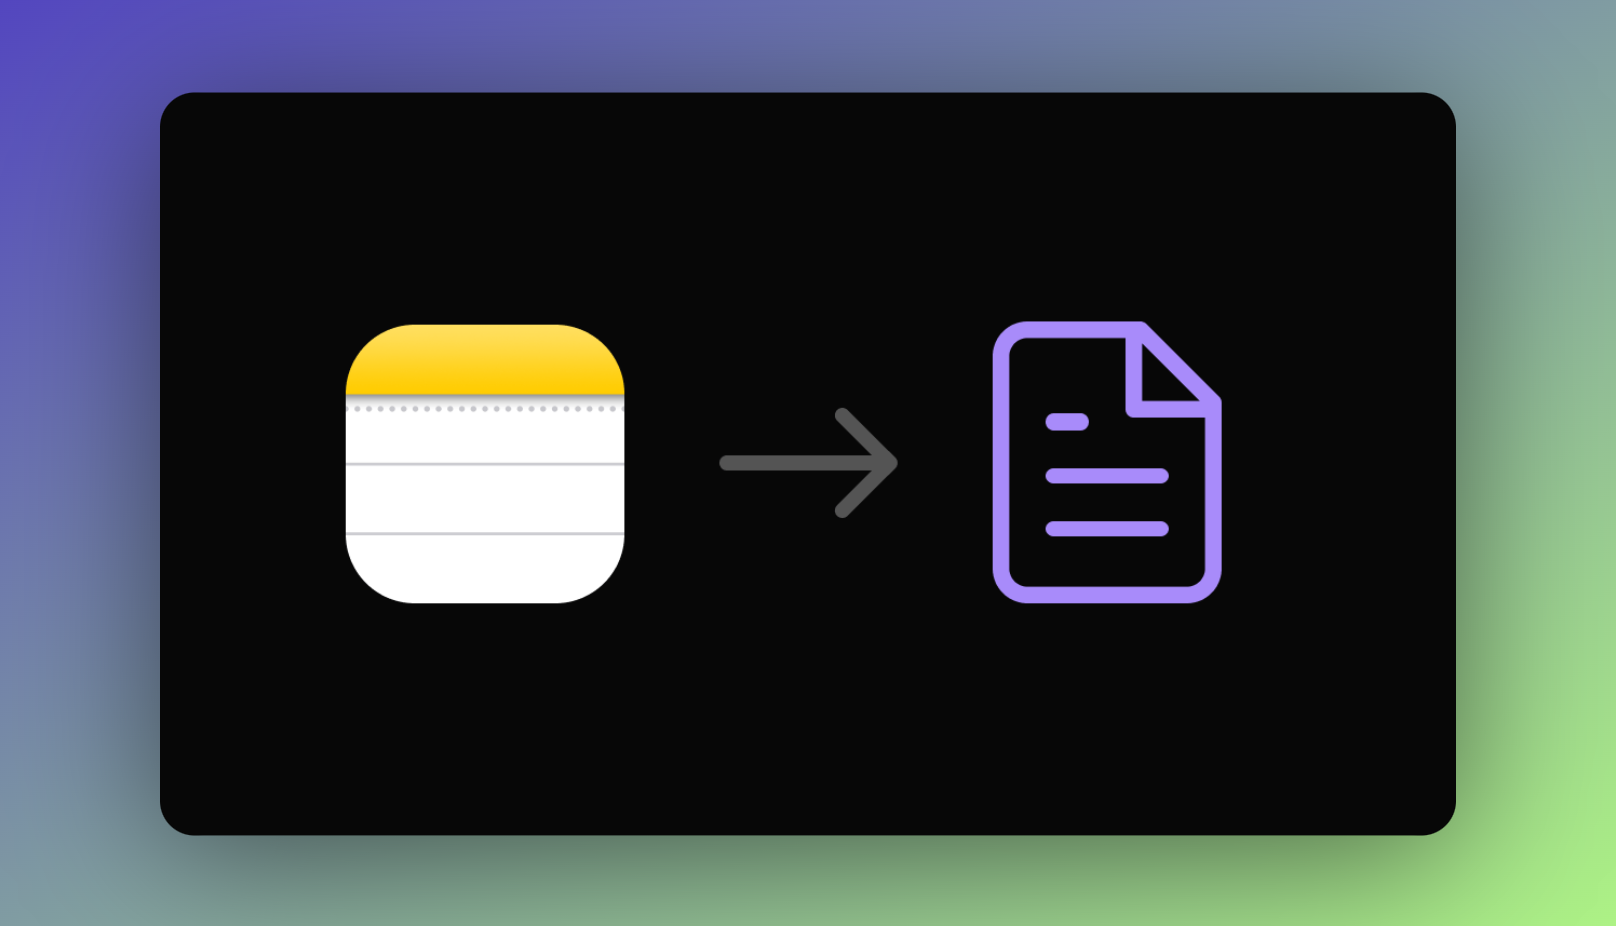 Struggling to export Apple Notes? Discover the ultimate guide on how to export Apple Notes to Markdown using Obsidian Importer. Get your notes out of the Apple ecosystem and into a format you can use anywhere!